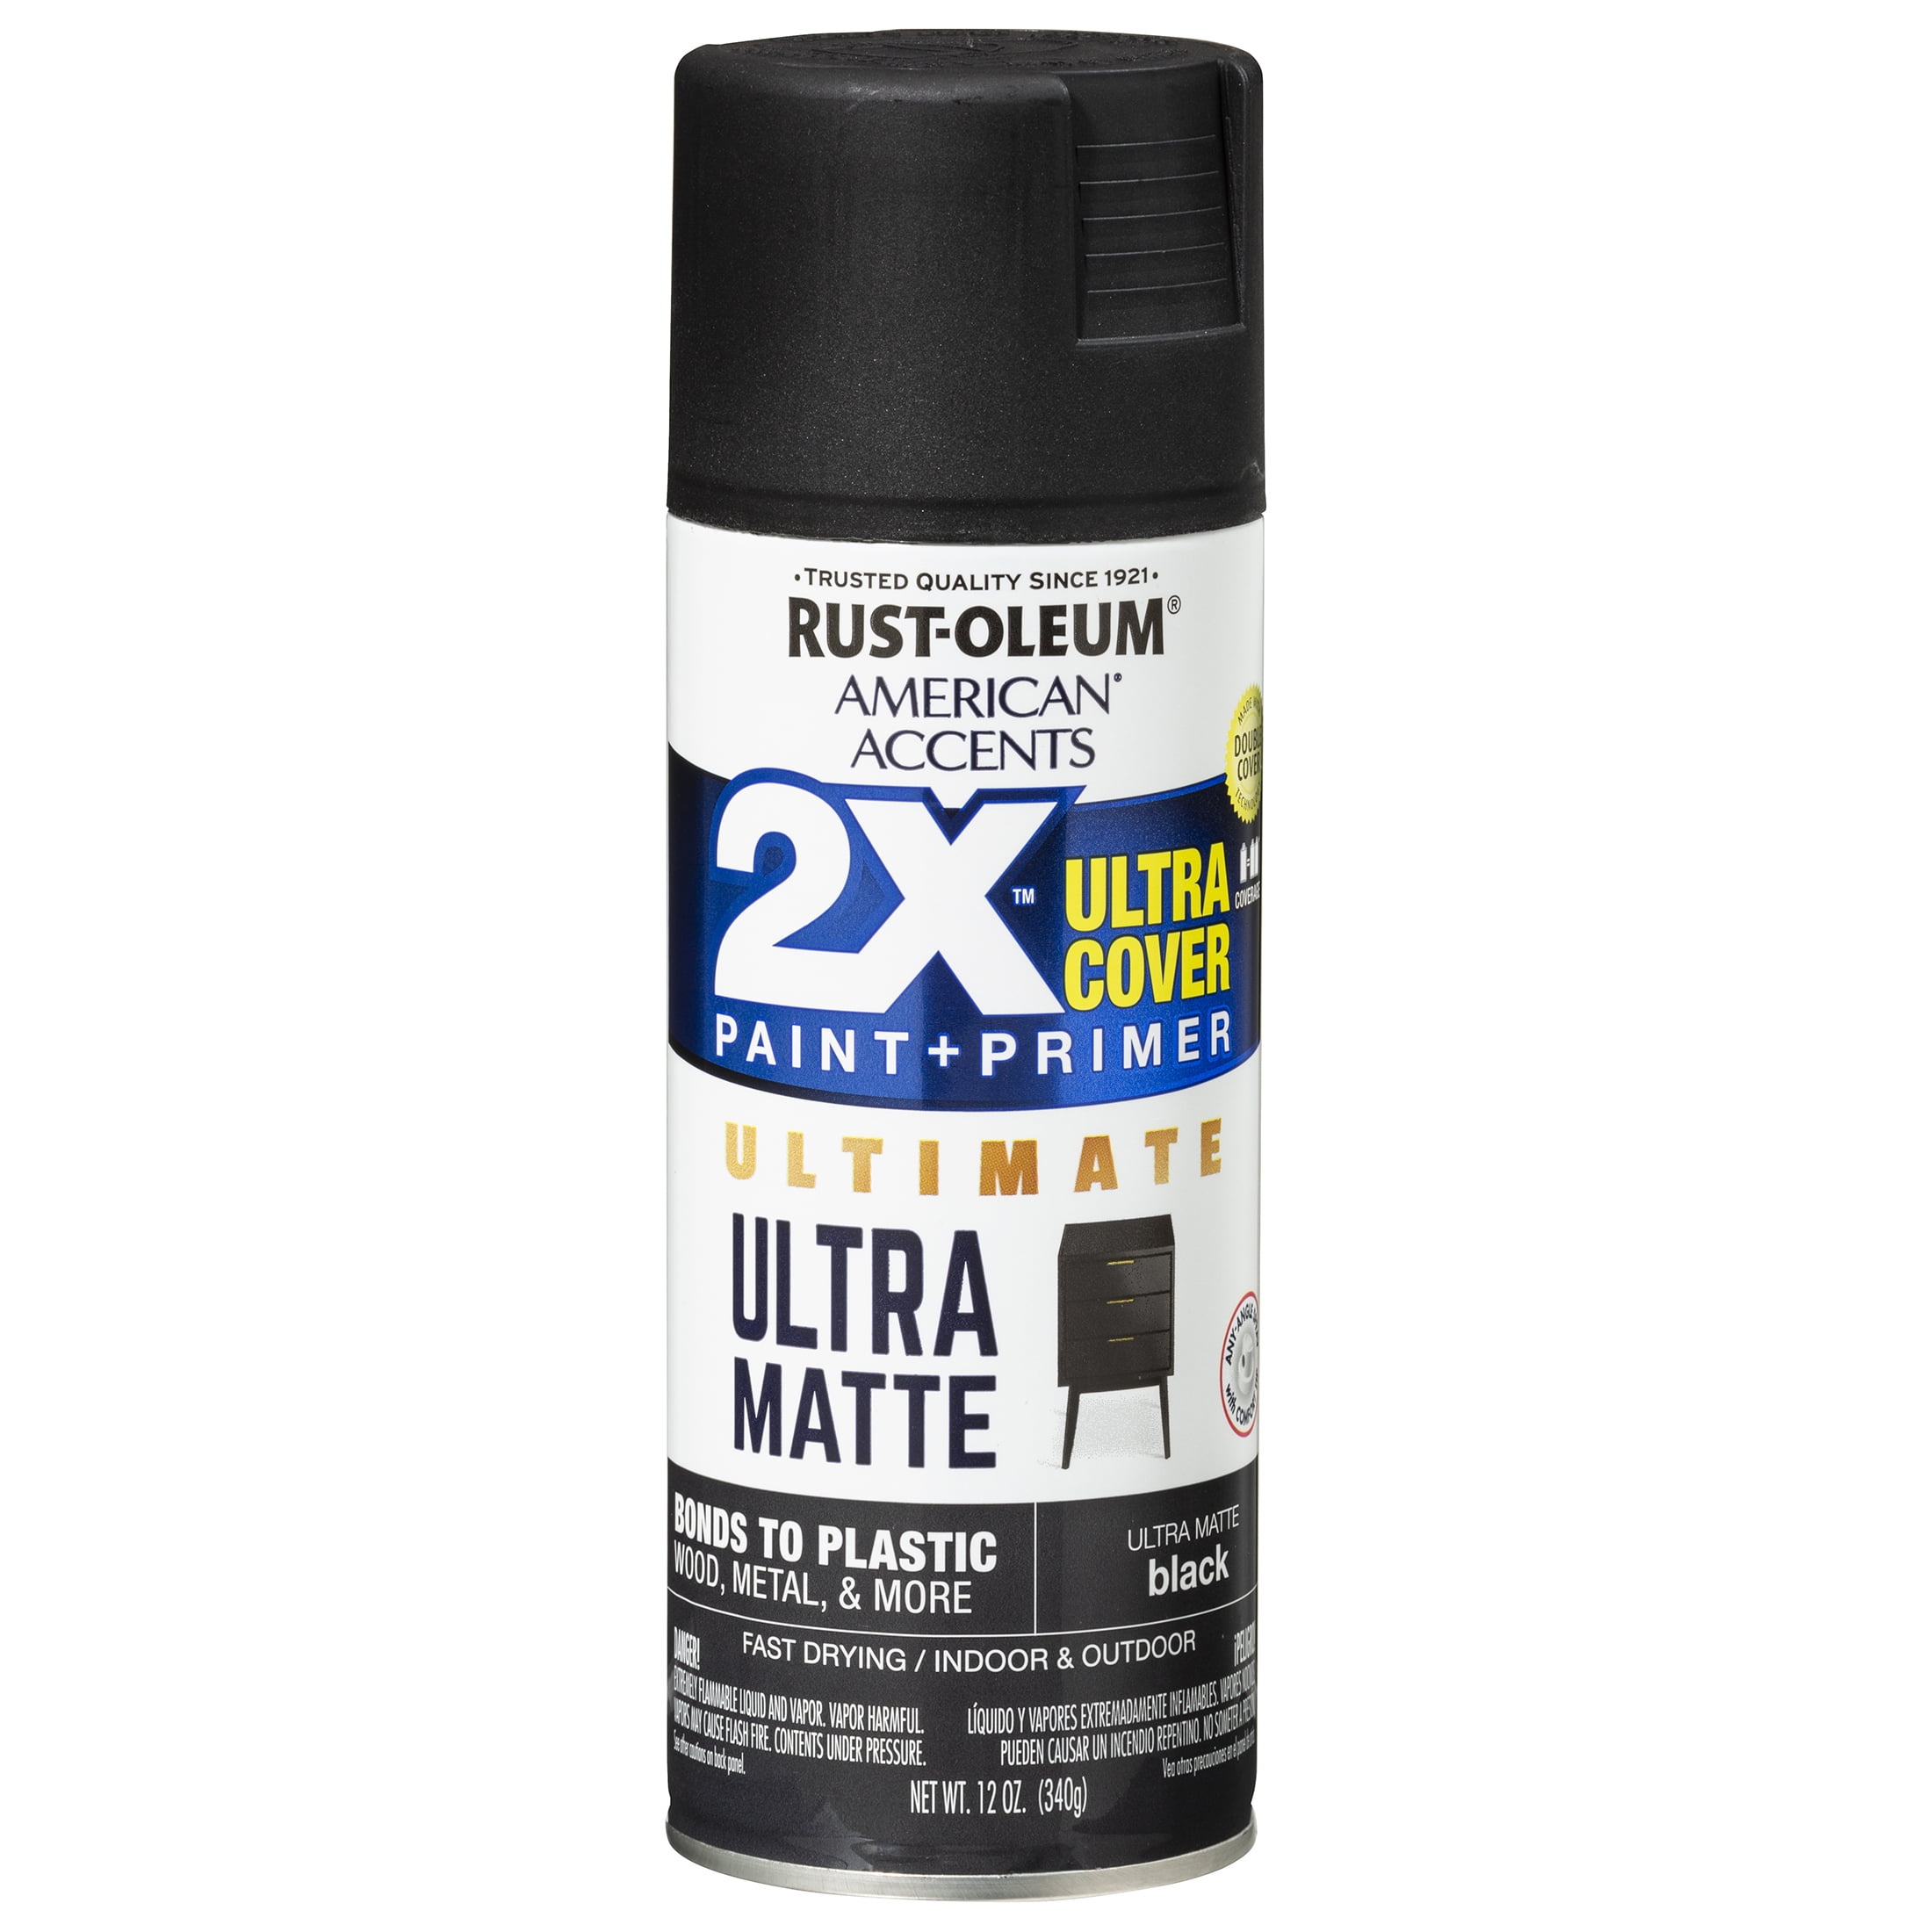 White, Rust-Oleum American Accents 2X Ultra Cover Ultra Matte Spray Paint,  12 oz